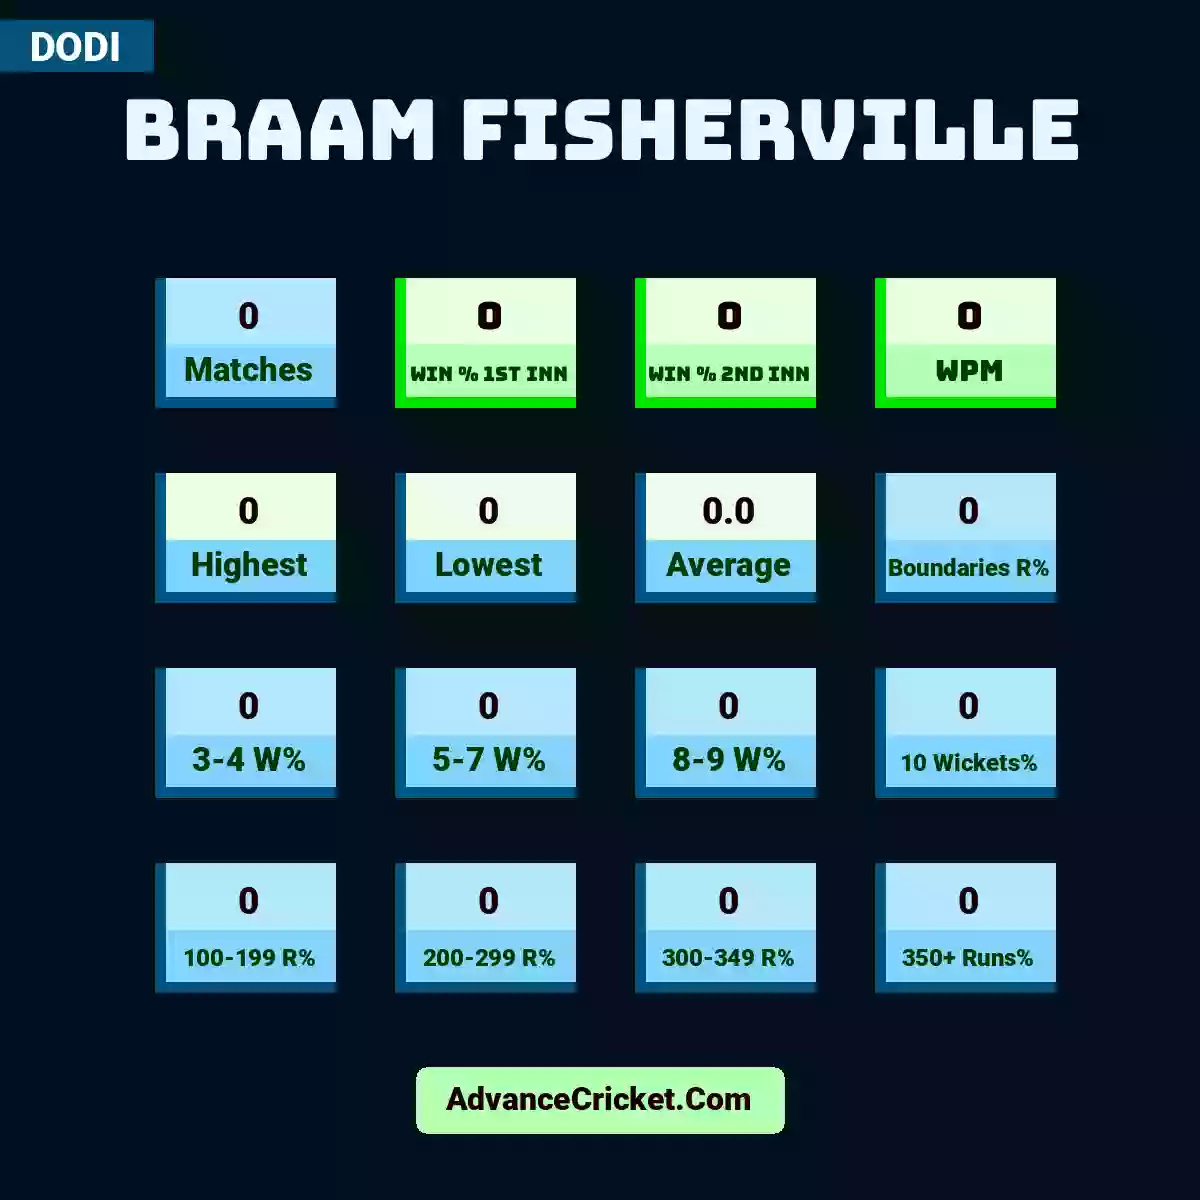 Image showing Braam Fisherville with Matches: 0, Win % 1st Inn: 0, Win % 2nd Inn: 0, WPM: 0, Highest: 0, Lowest: 0, Average: 0.0, Boundaries R%: 0, 3-4 W%: 0, 5-7 W%: 0, 8-9 W%: 0, 10 Wickets%: 0, 100-199 R%: 0, 200-299 R%: 0, 300-349 R%: 0, 350+ Runs%: 0.